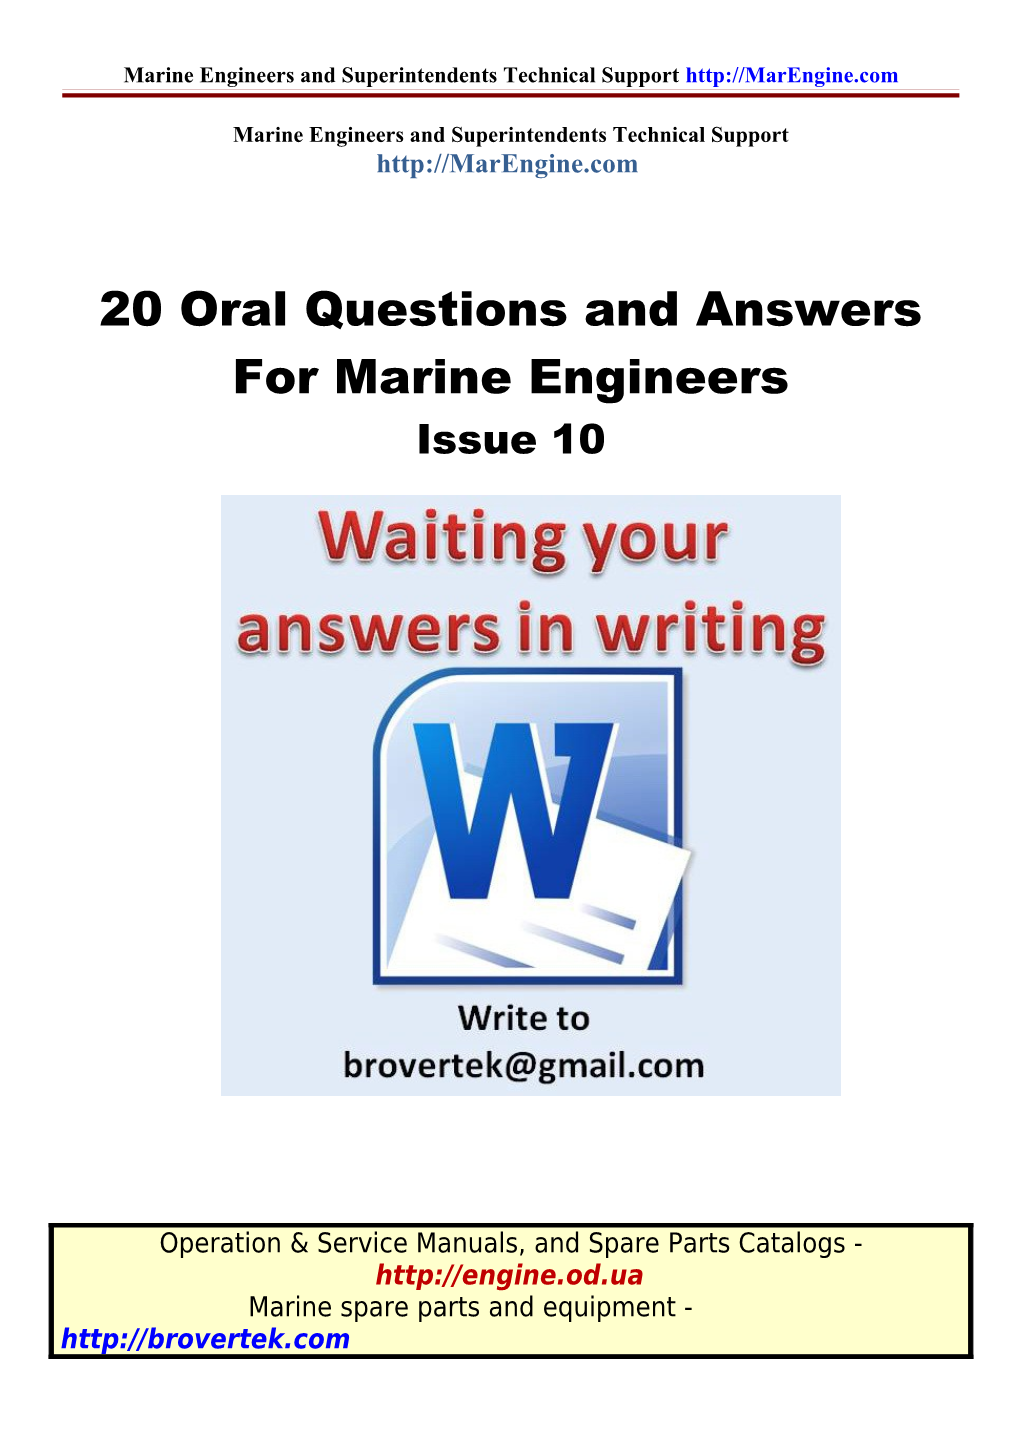 Marine Engineers and Superintendents Technical Support